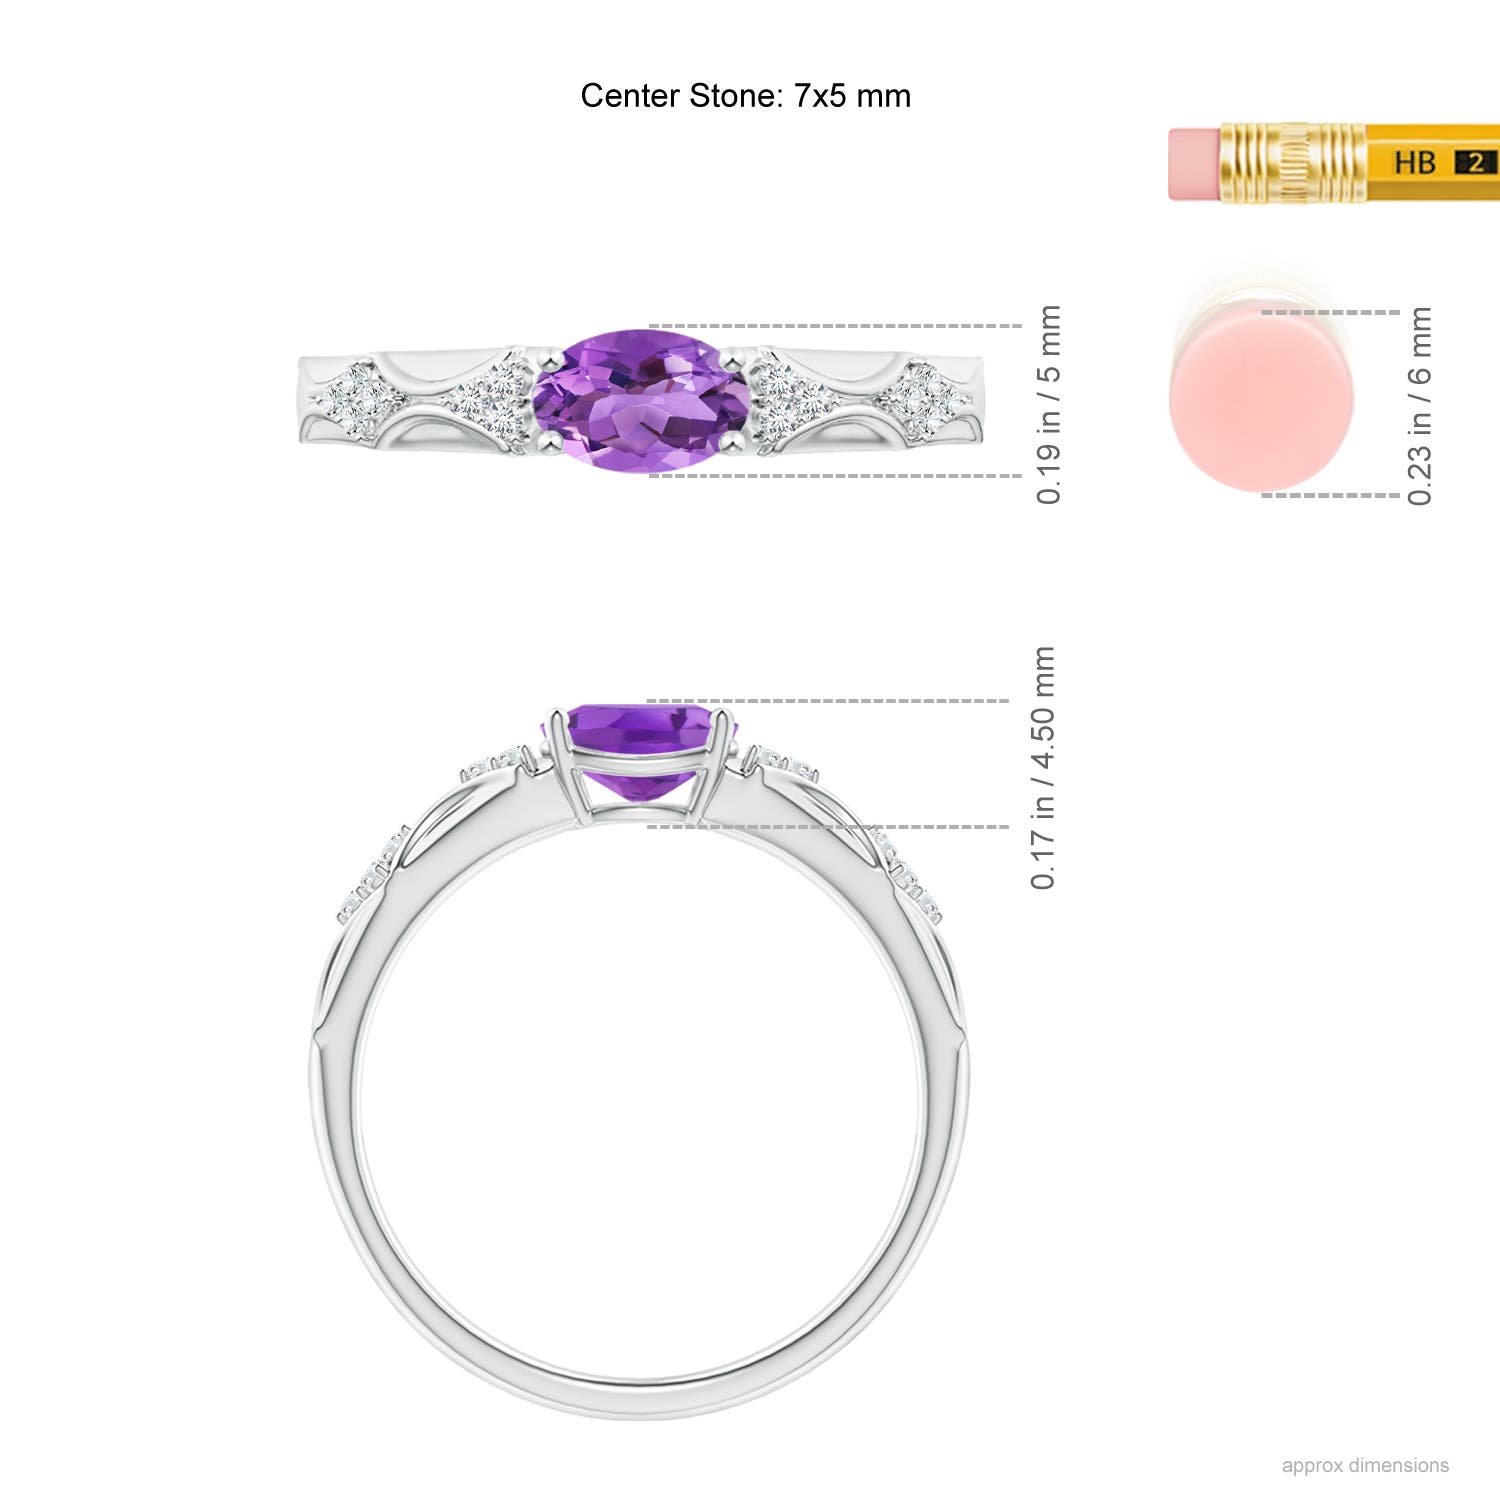 AA - Amethyst / 0.75 CT / 14 KT White Gold